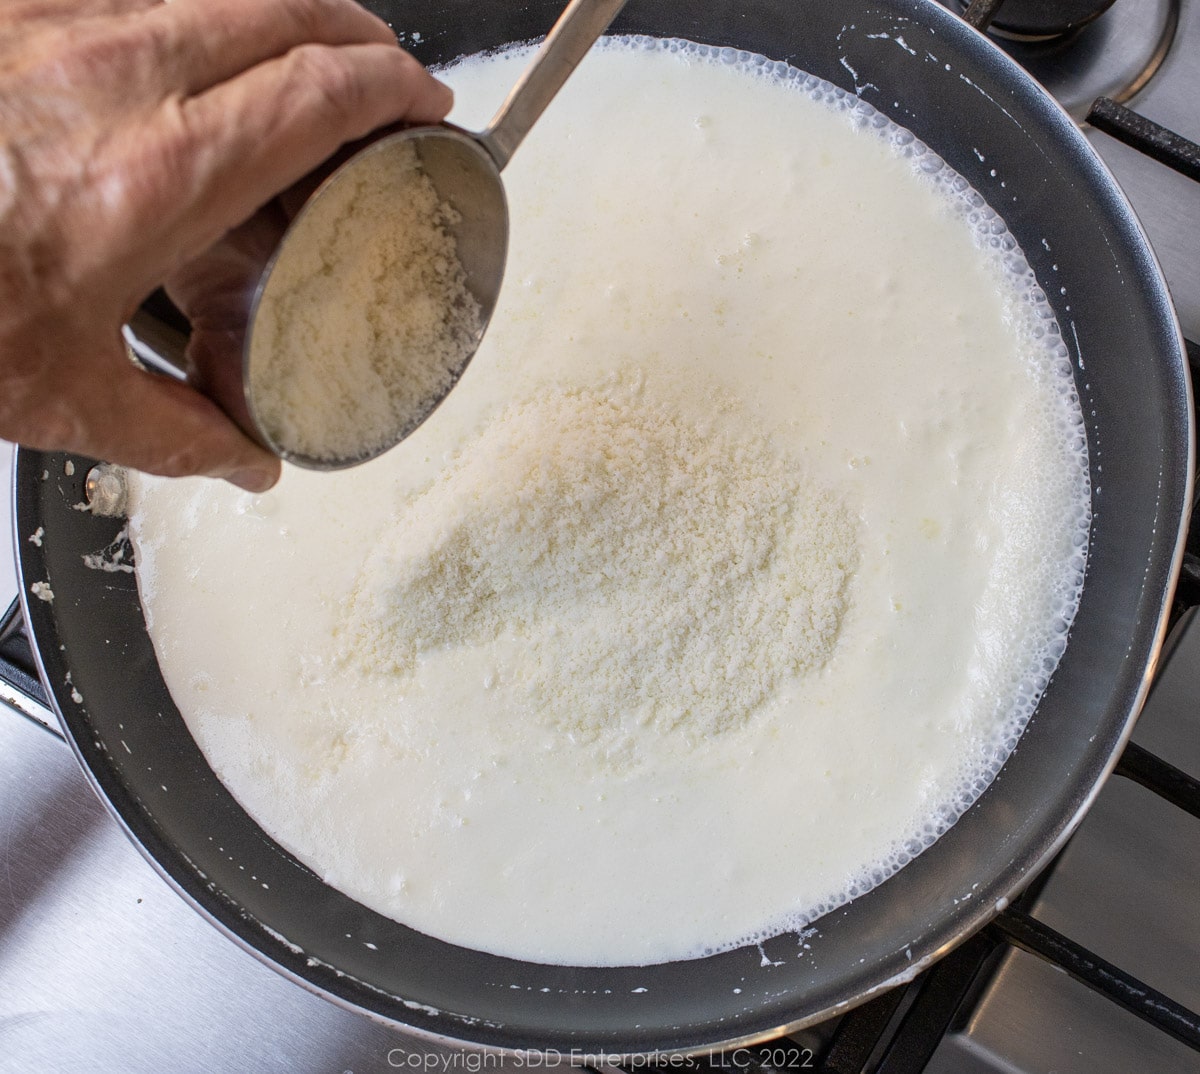 grated cheese being added to heavy cream in a sauté pan